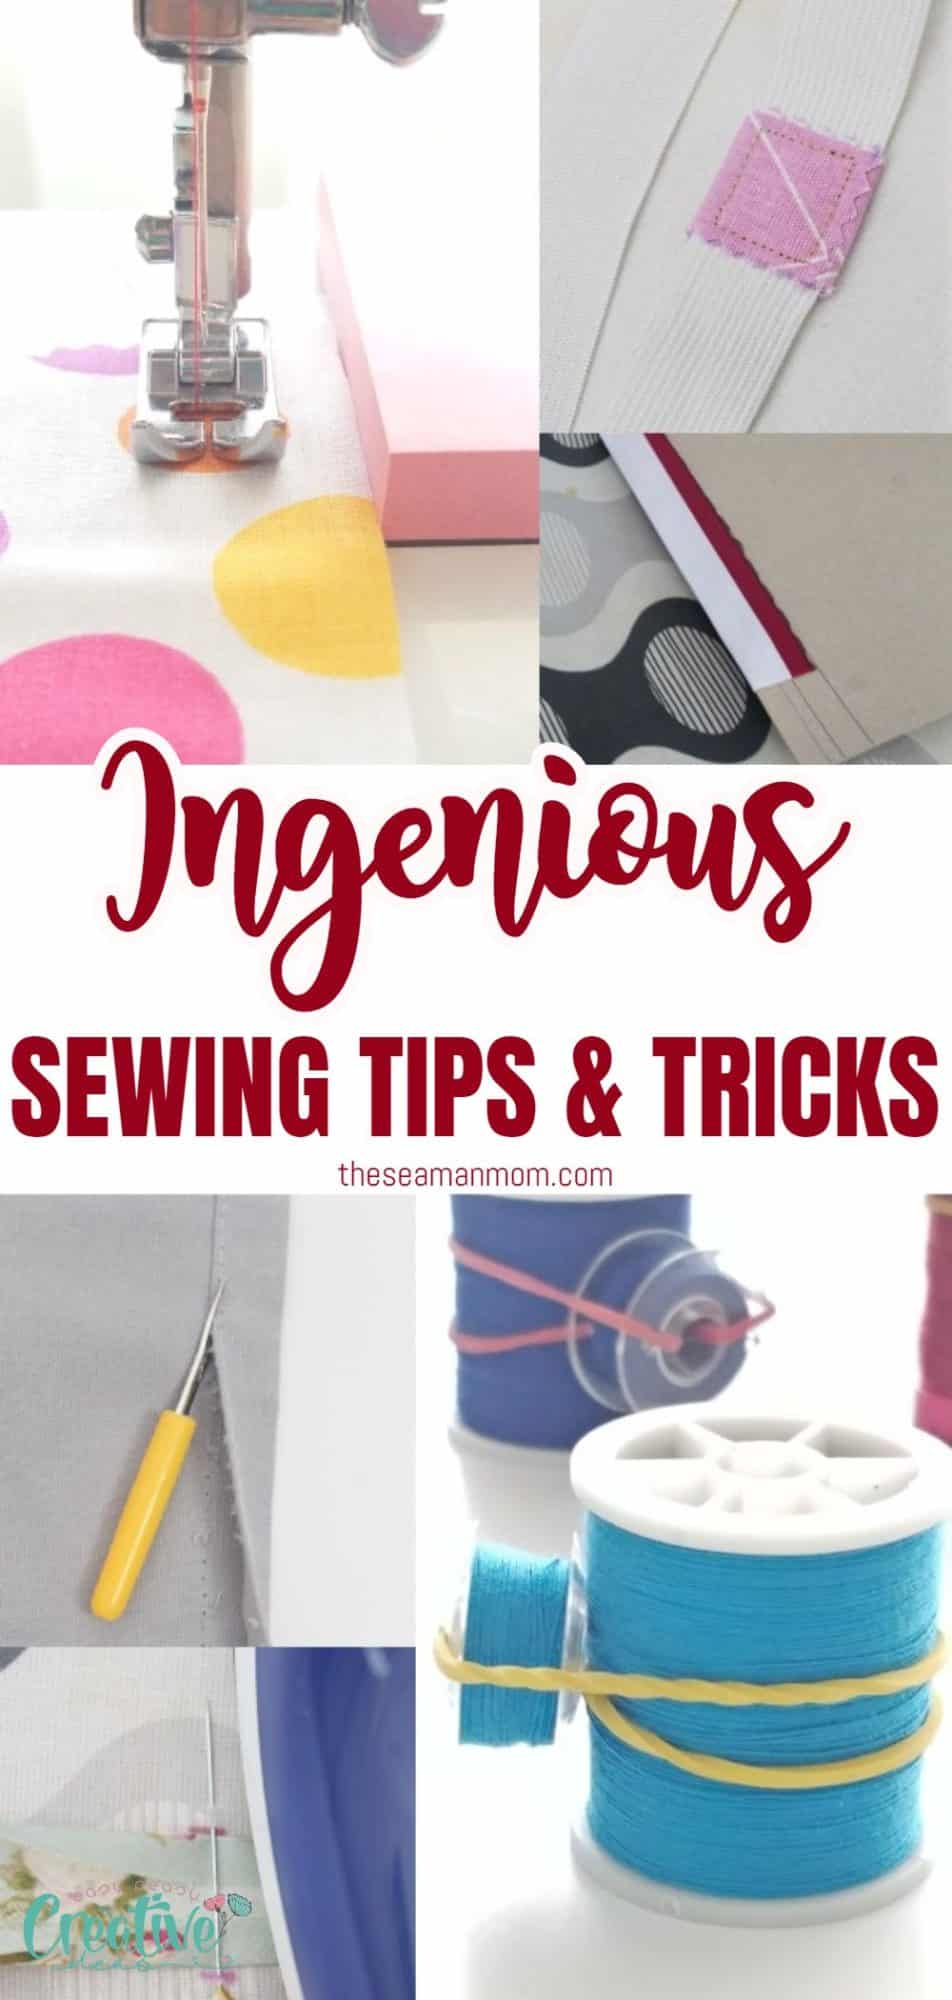 Ingenious sewing tips and hacks